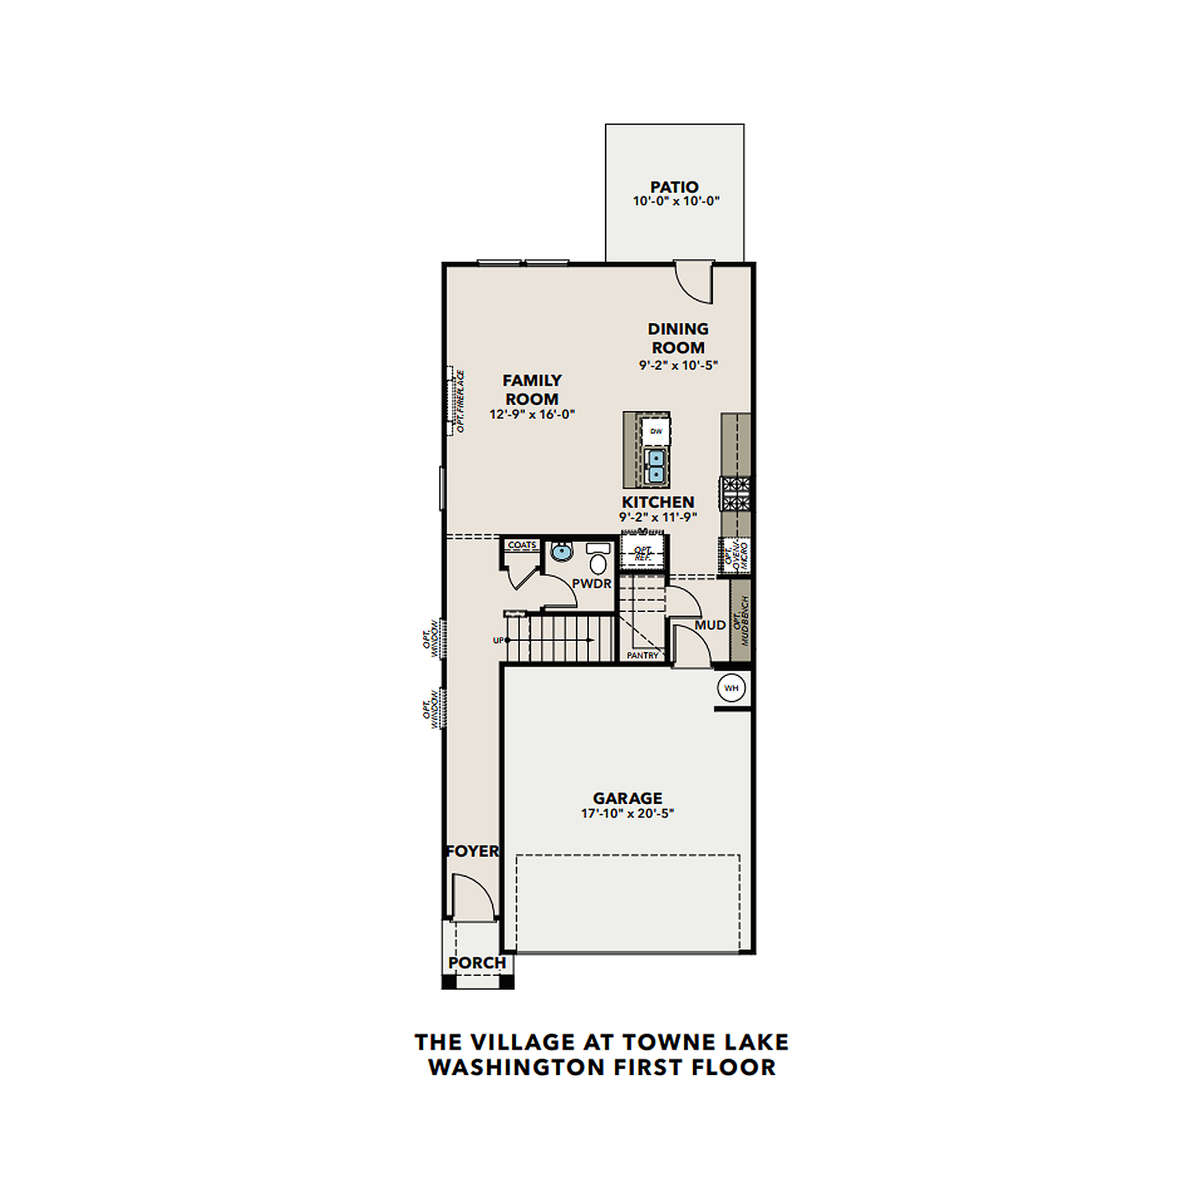 1 - The Washington E floor plan layout for 705 Stickley Oak Way in Davidson Homes' The Village at Towne Lake community.